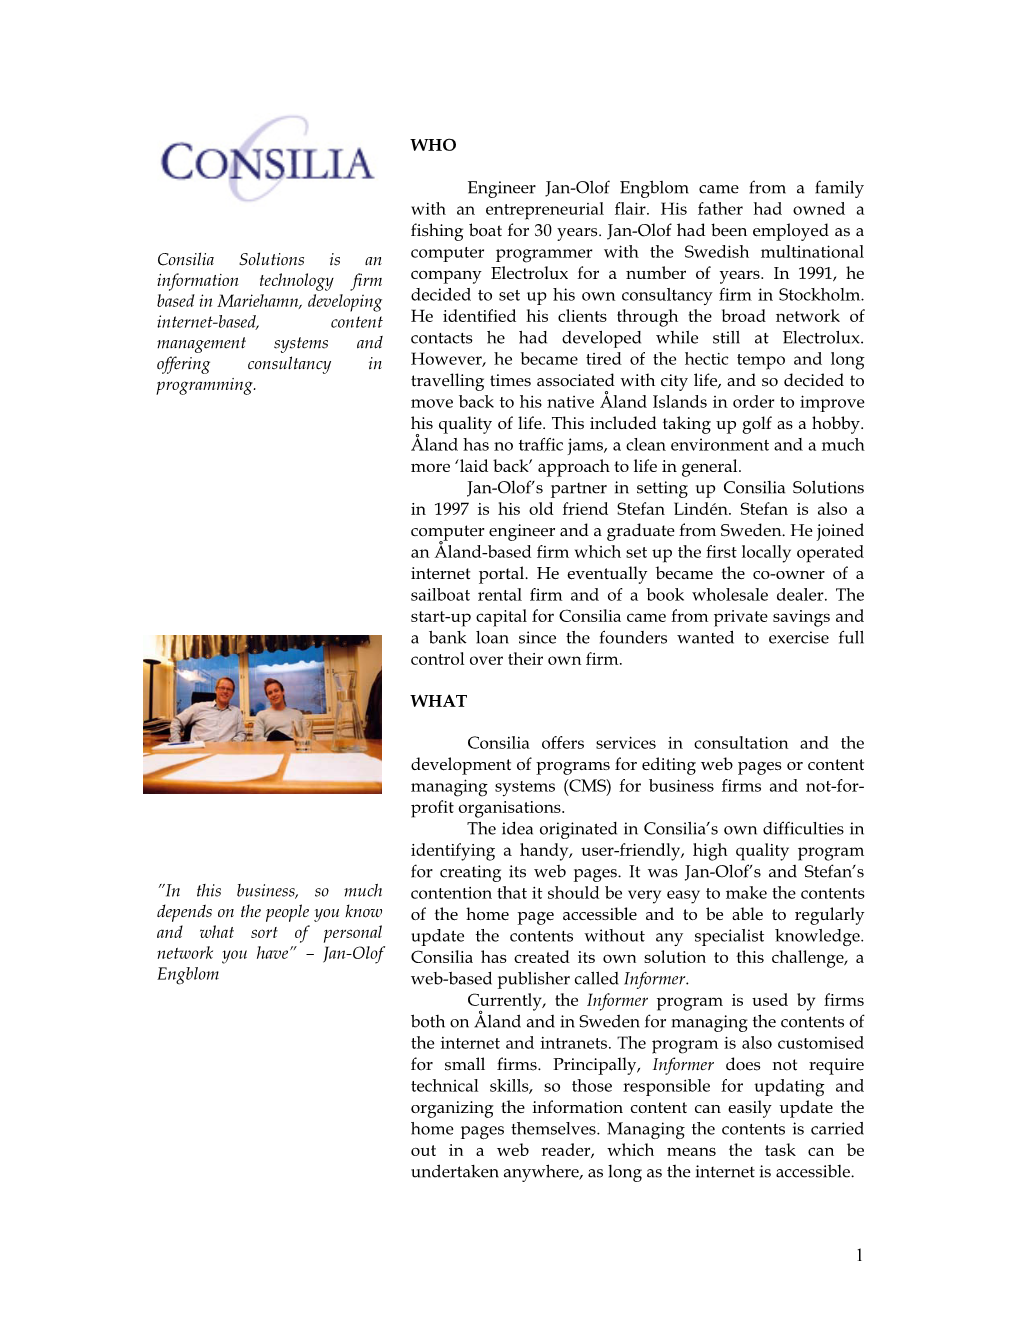 Consilia Solutions Is an Information Technology Firm Based In